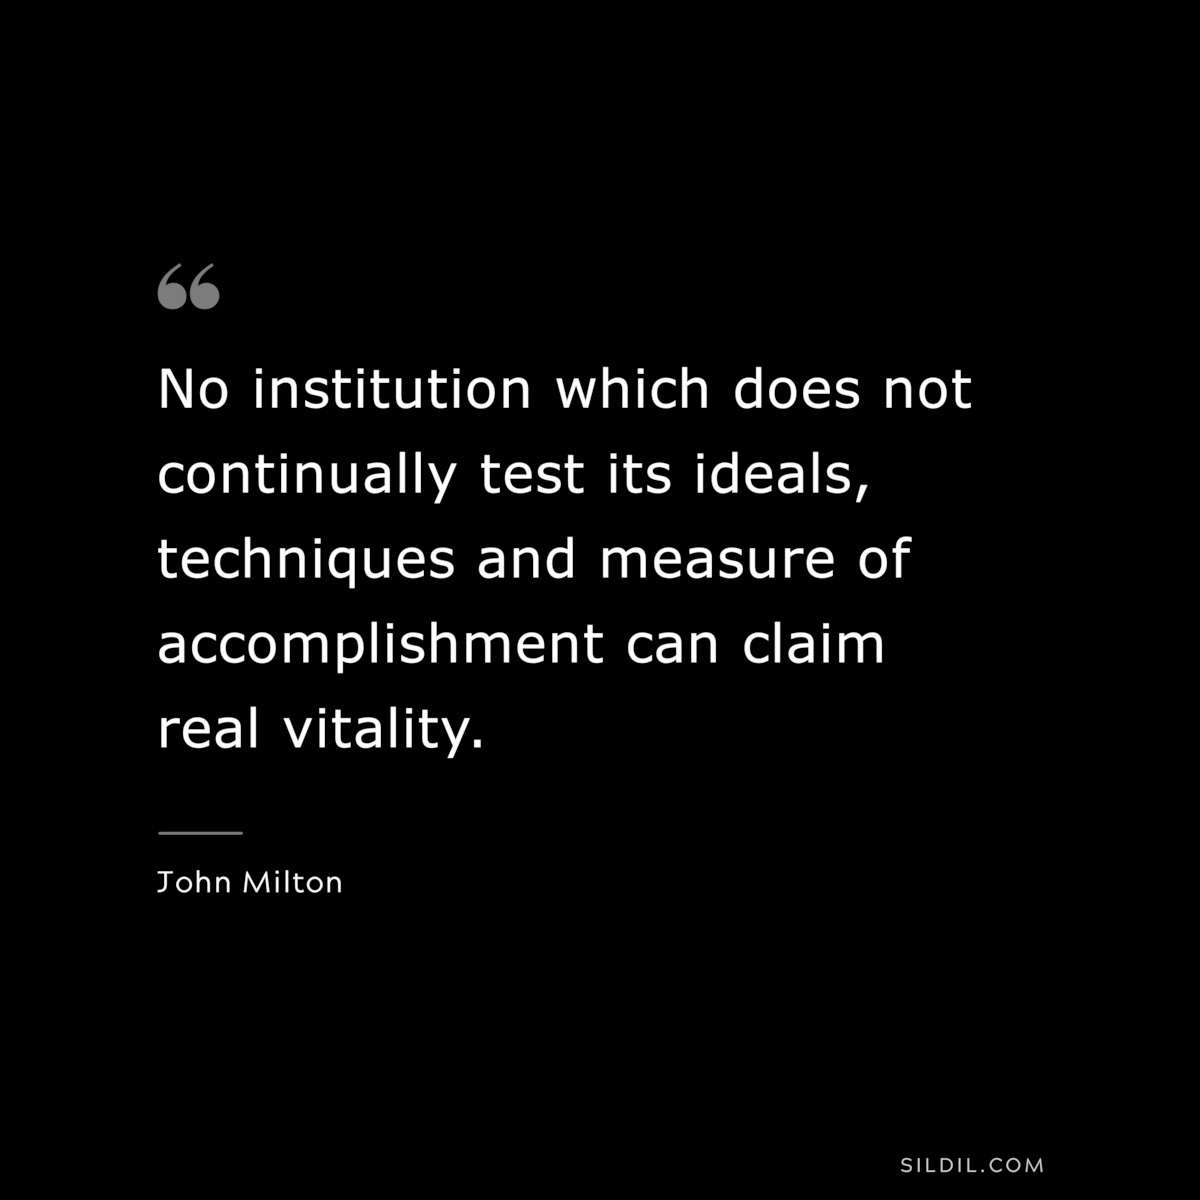 No institution which does not continually test its ideals, techniques and measure of accomplishment can claim real vitality. ― John Milton